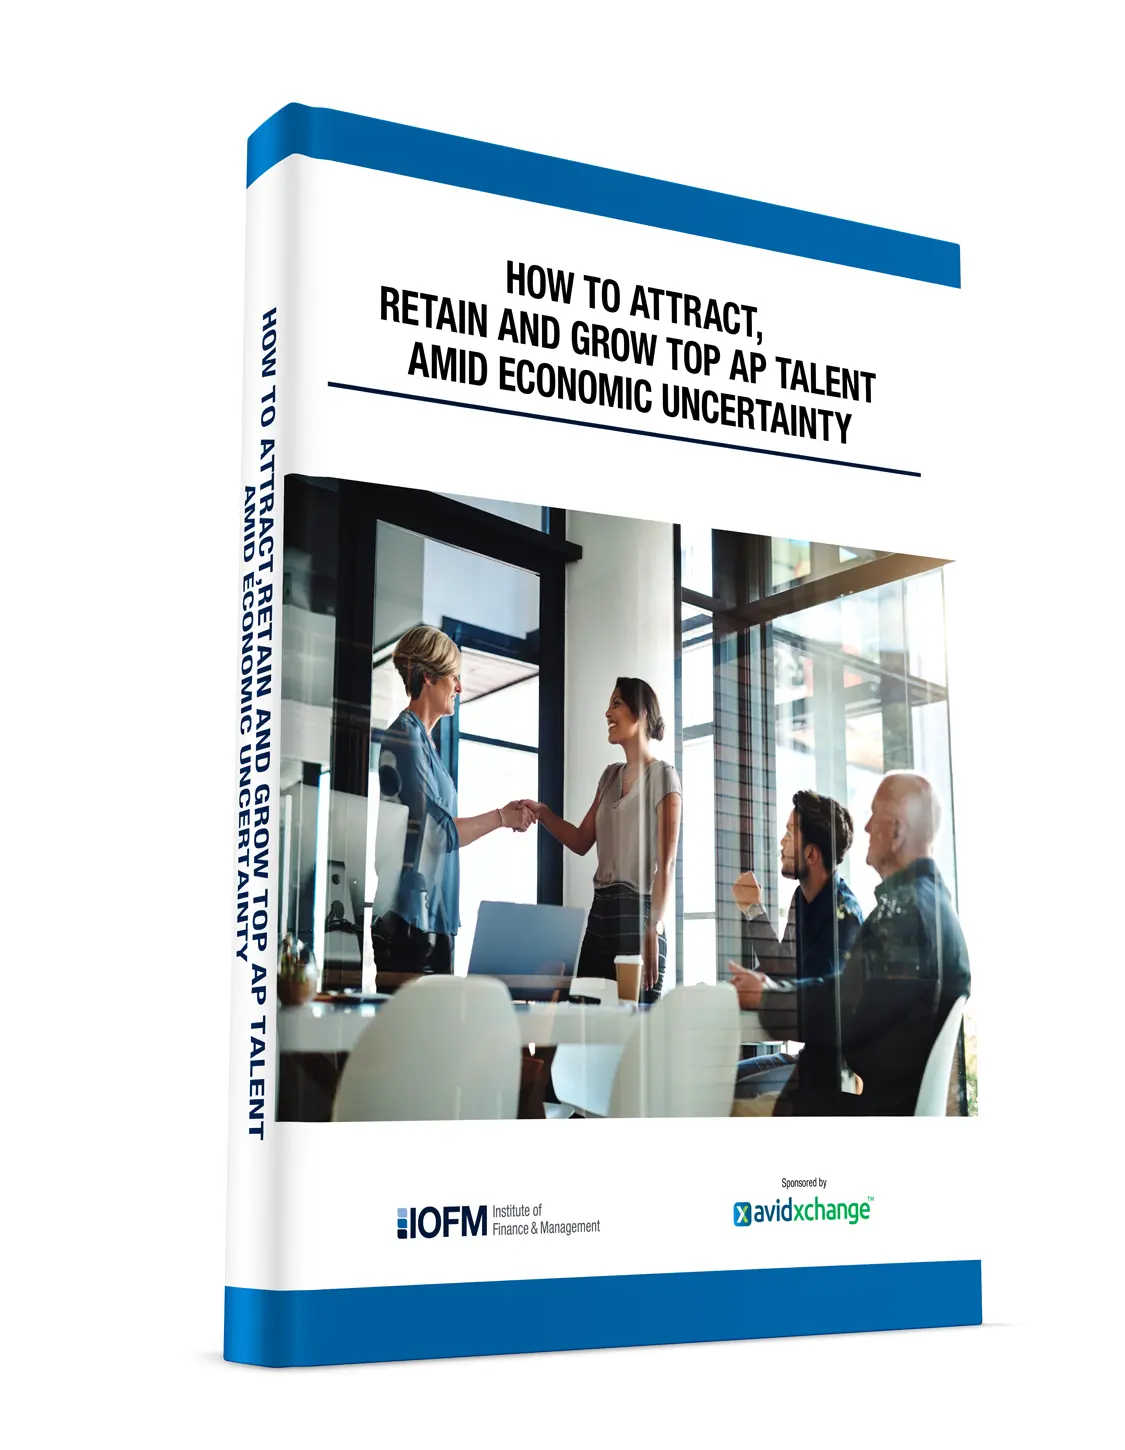 How to Attract, Retain and Grow Top AP Talent book cover.